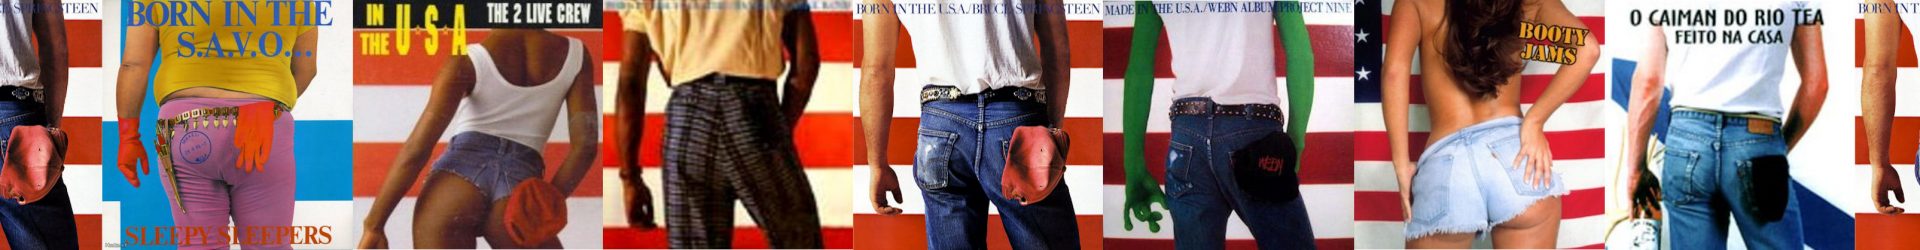 WORLD PARTY: When You Come Back to Me – DAVID BOWIE: Young Americans